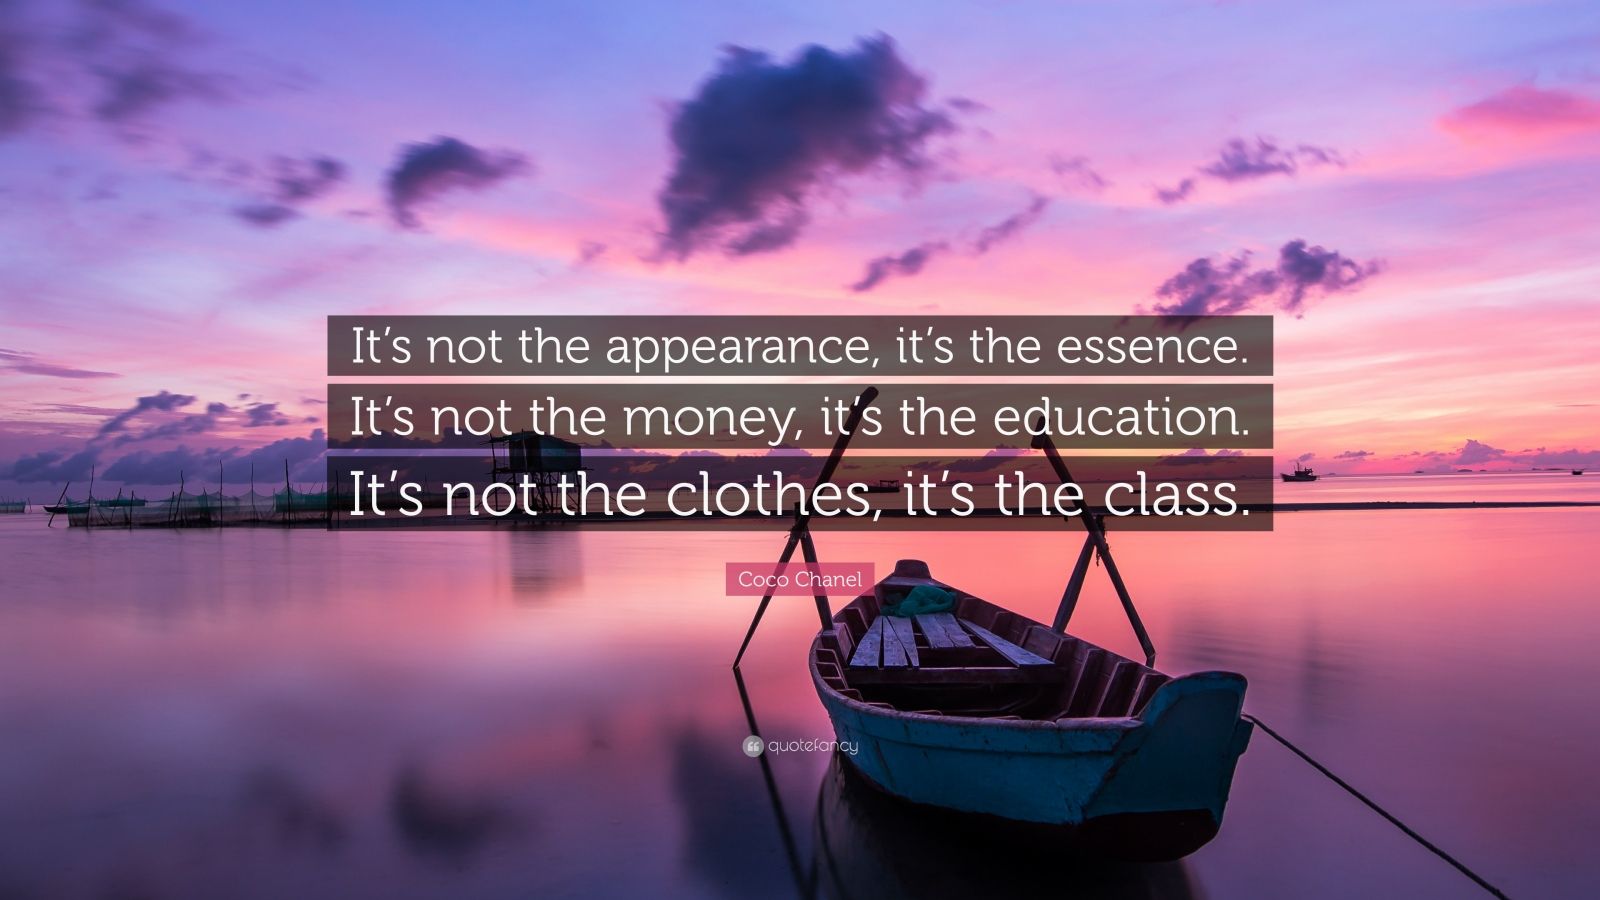 Coco Chanel Quote: “It's not the appearance, it's the essence. It's not the  money, it's the education. It's not the clothes, it's the class.”